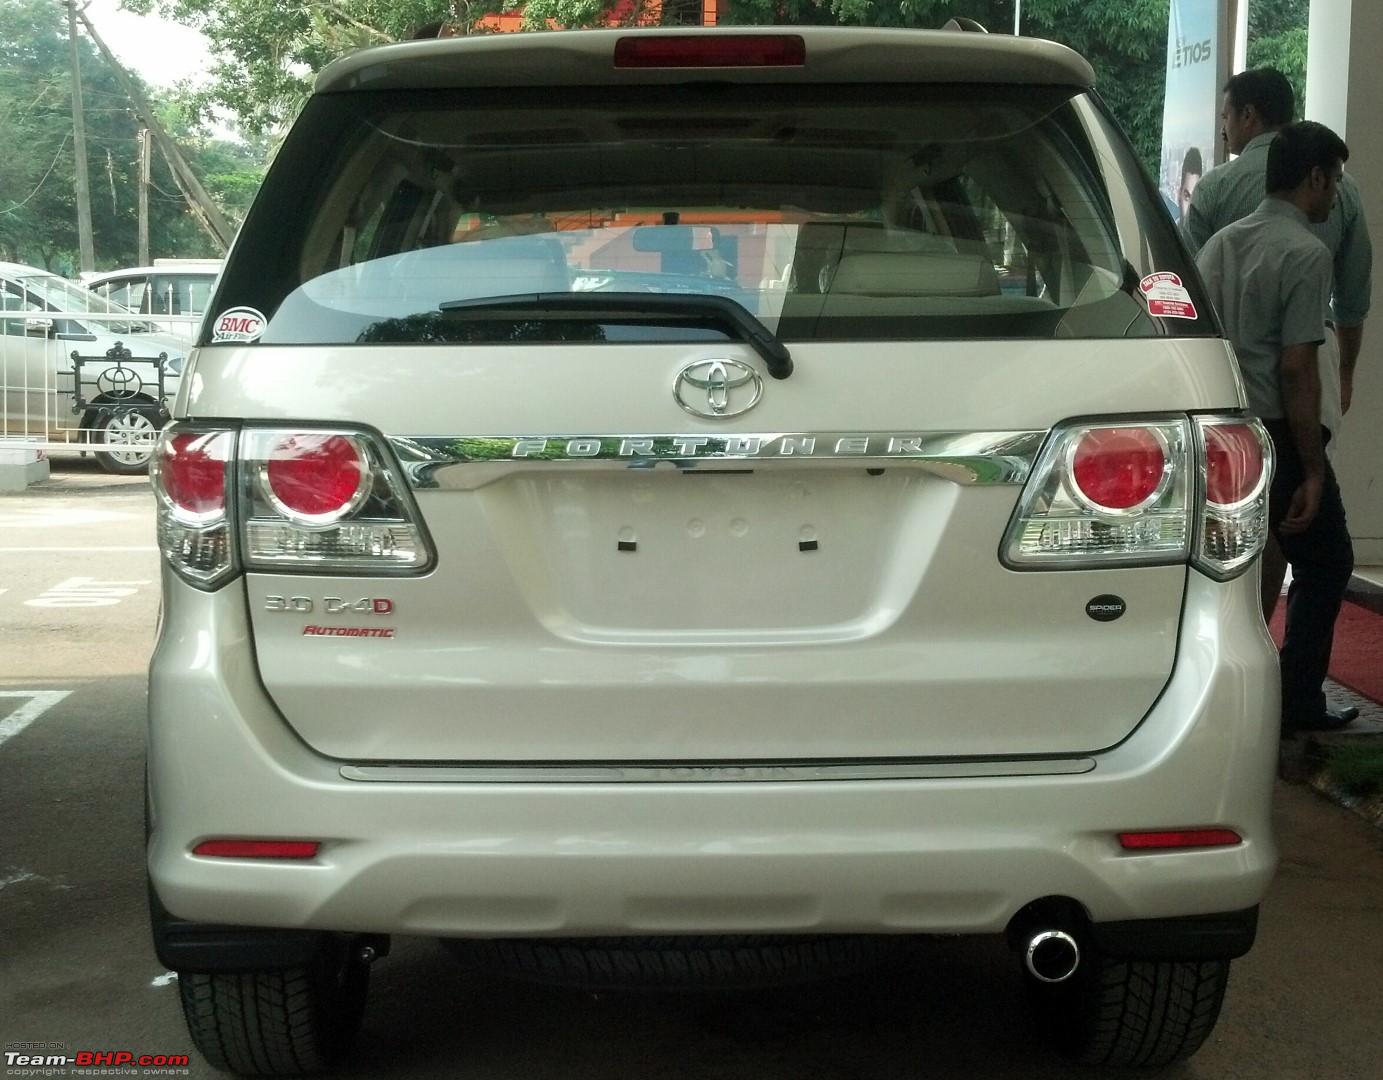 Toyota fortuner 4x2 automatic diesel review